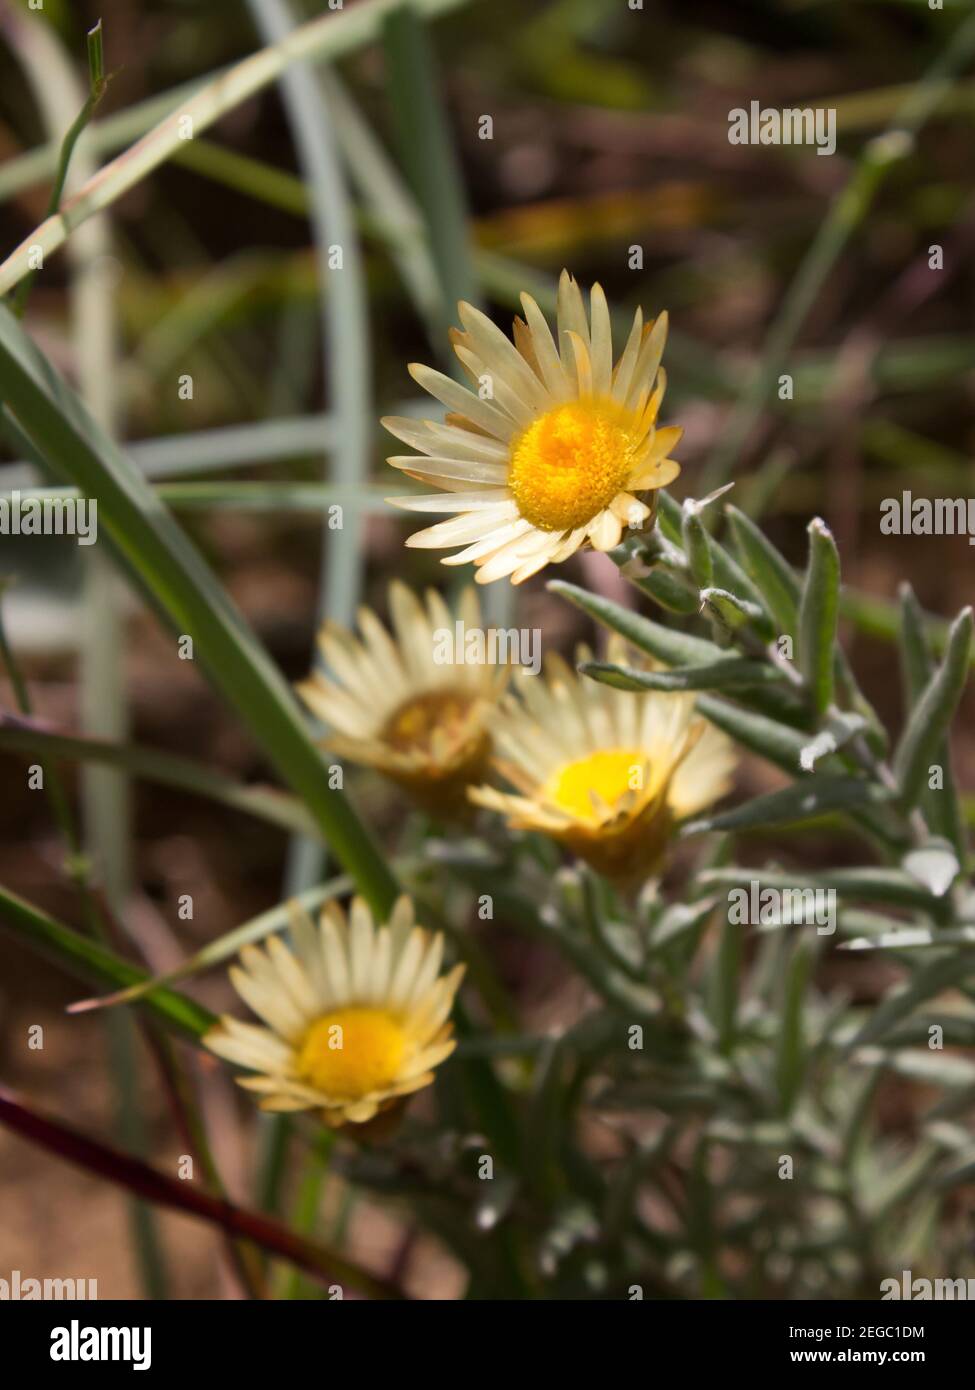 Small cream colored helichrysum flowers, known commonly as sewejaartjies or everlastings, in the Drakensberg Mountains of South Africa Stock Photo